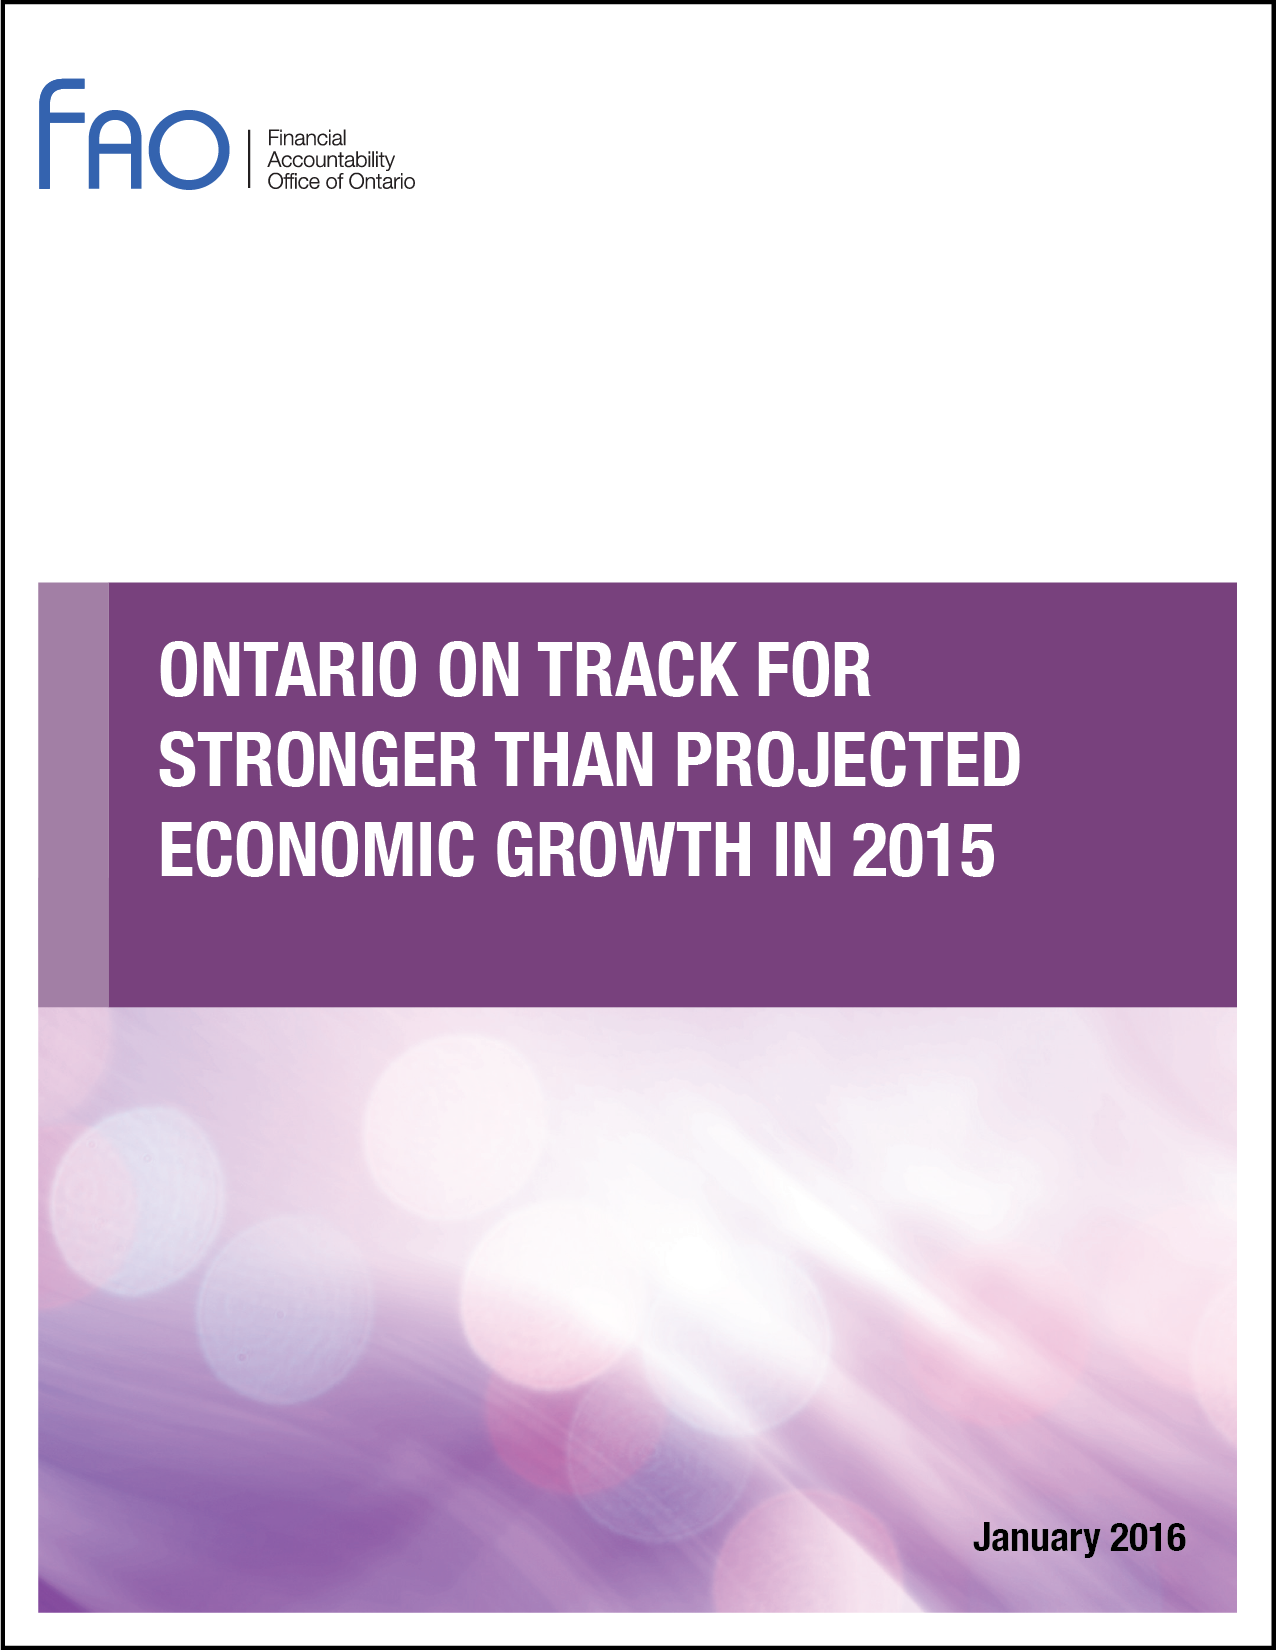 Ontario on Track for Stronger than Projected Economic Growth in 2015